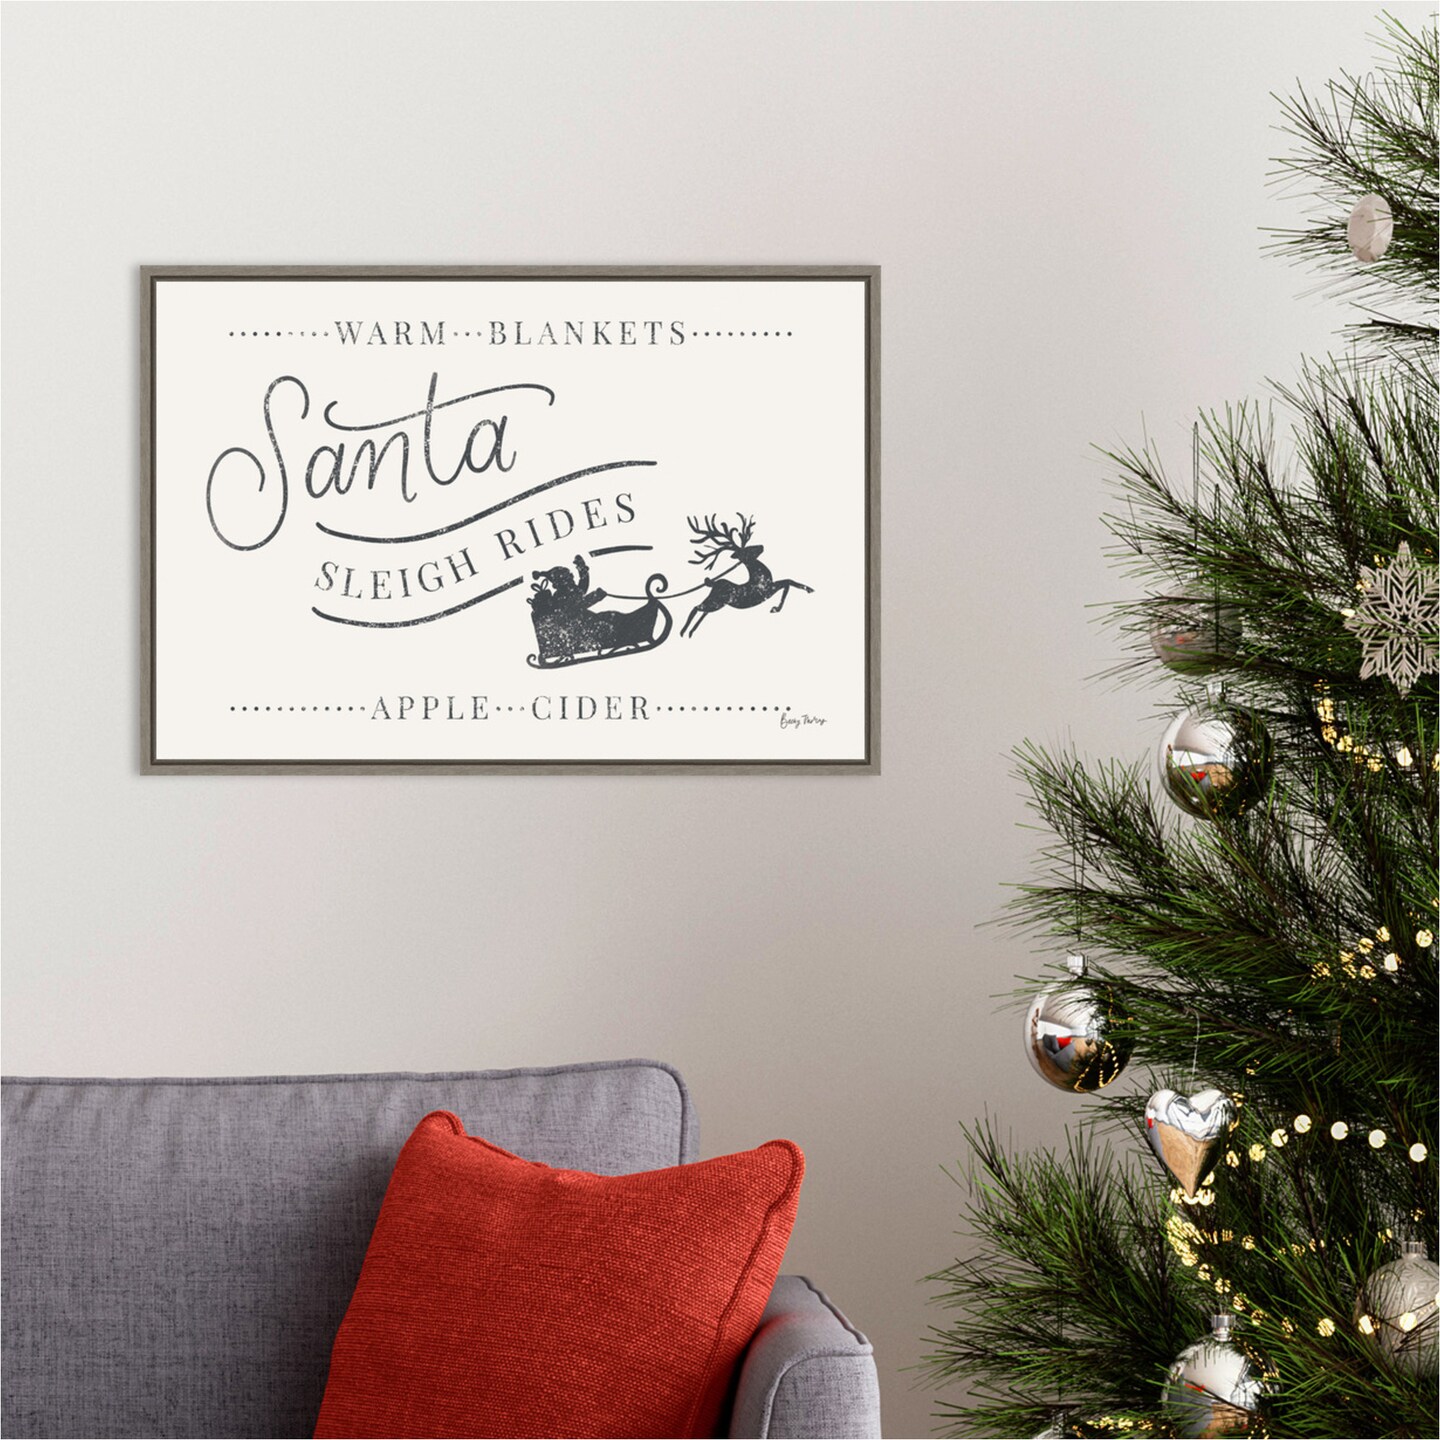 Vintage Christmas VI by Becky Thorns 23-in. W x 16-in. H. Canvas Wall Art Print Framed in Grey